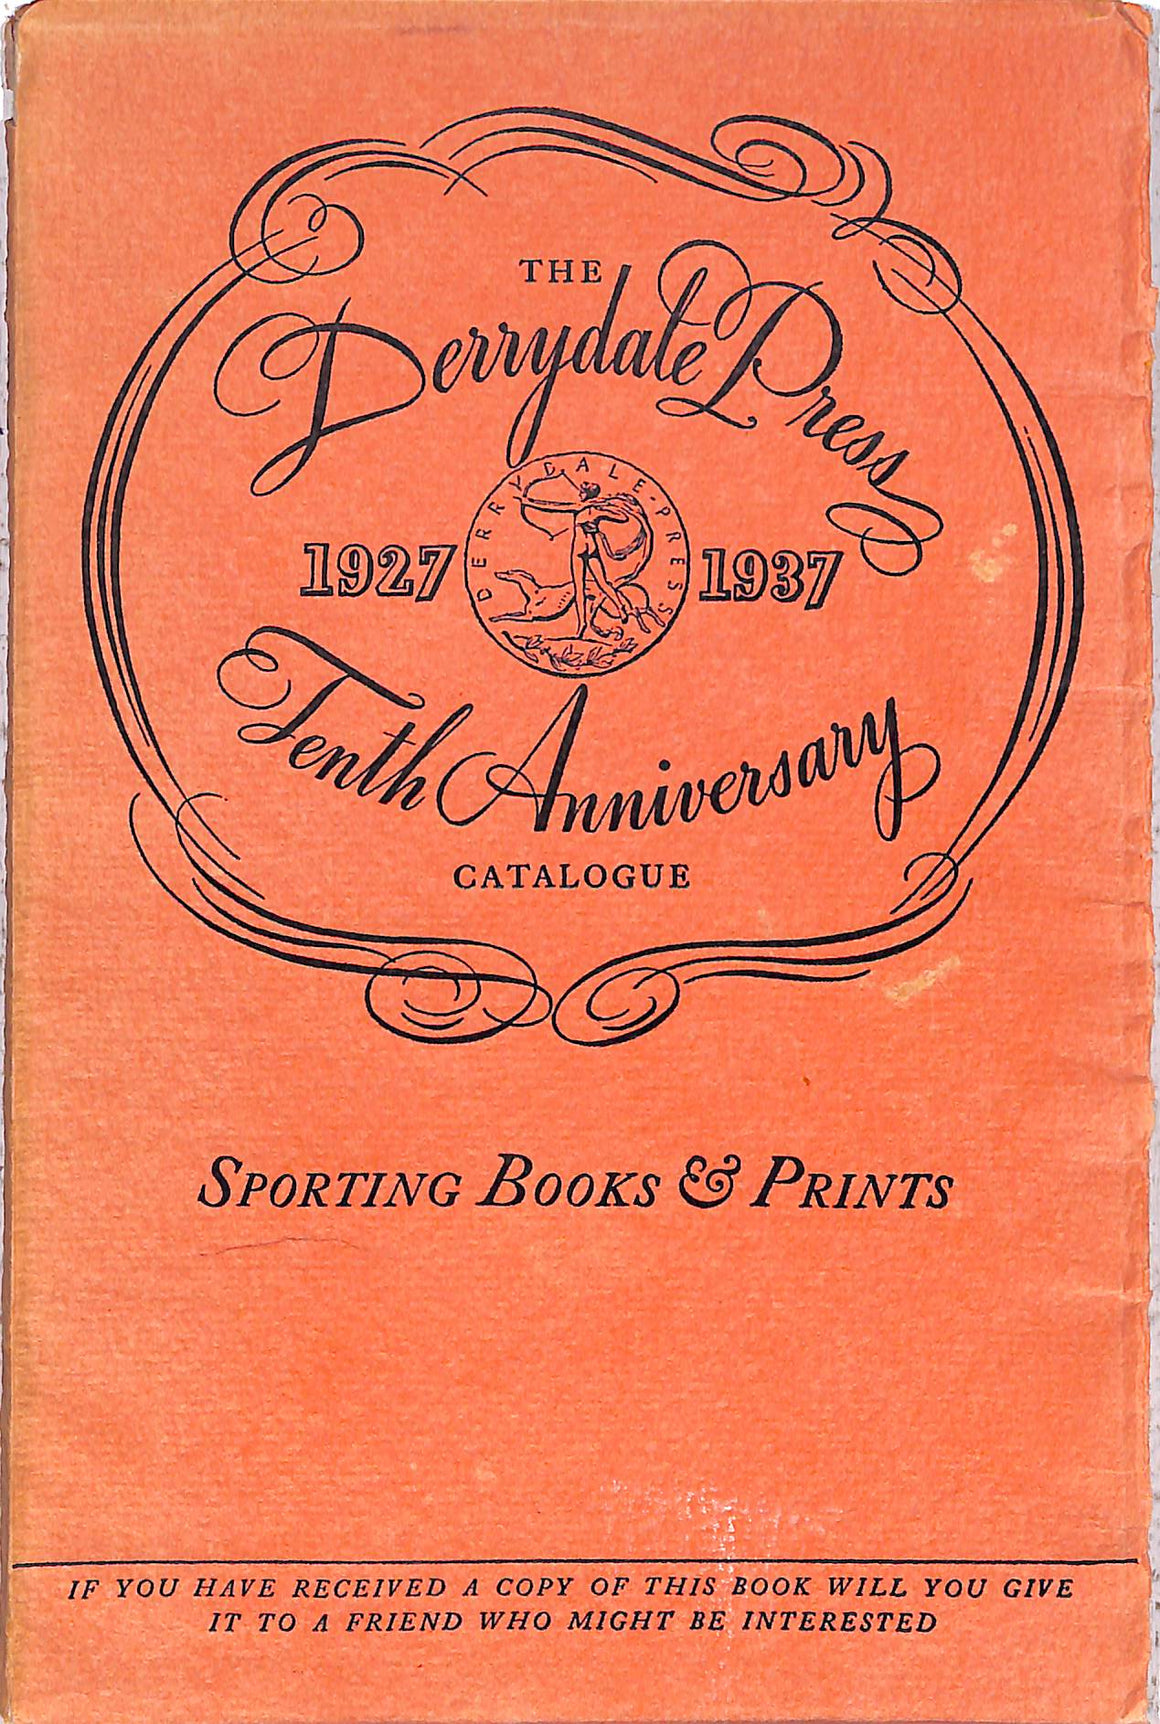 "The Derrydale Press 1927-1937 Tenth Anniversary Catalogue Sporting Books & Prints" 1937 CONNETT, Eugene V. III